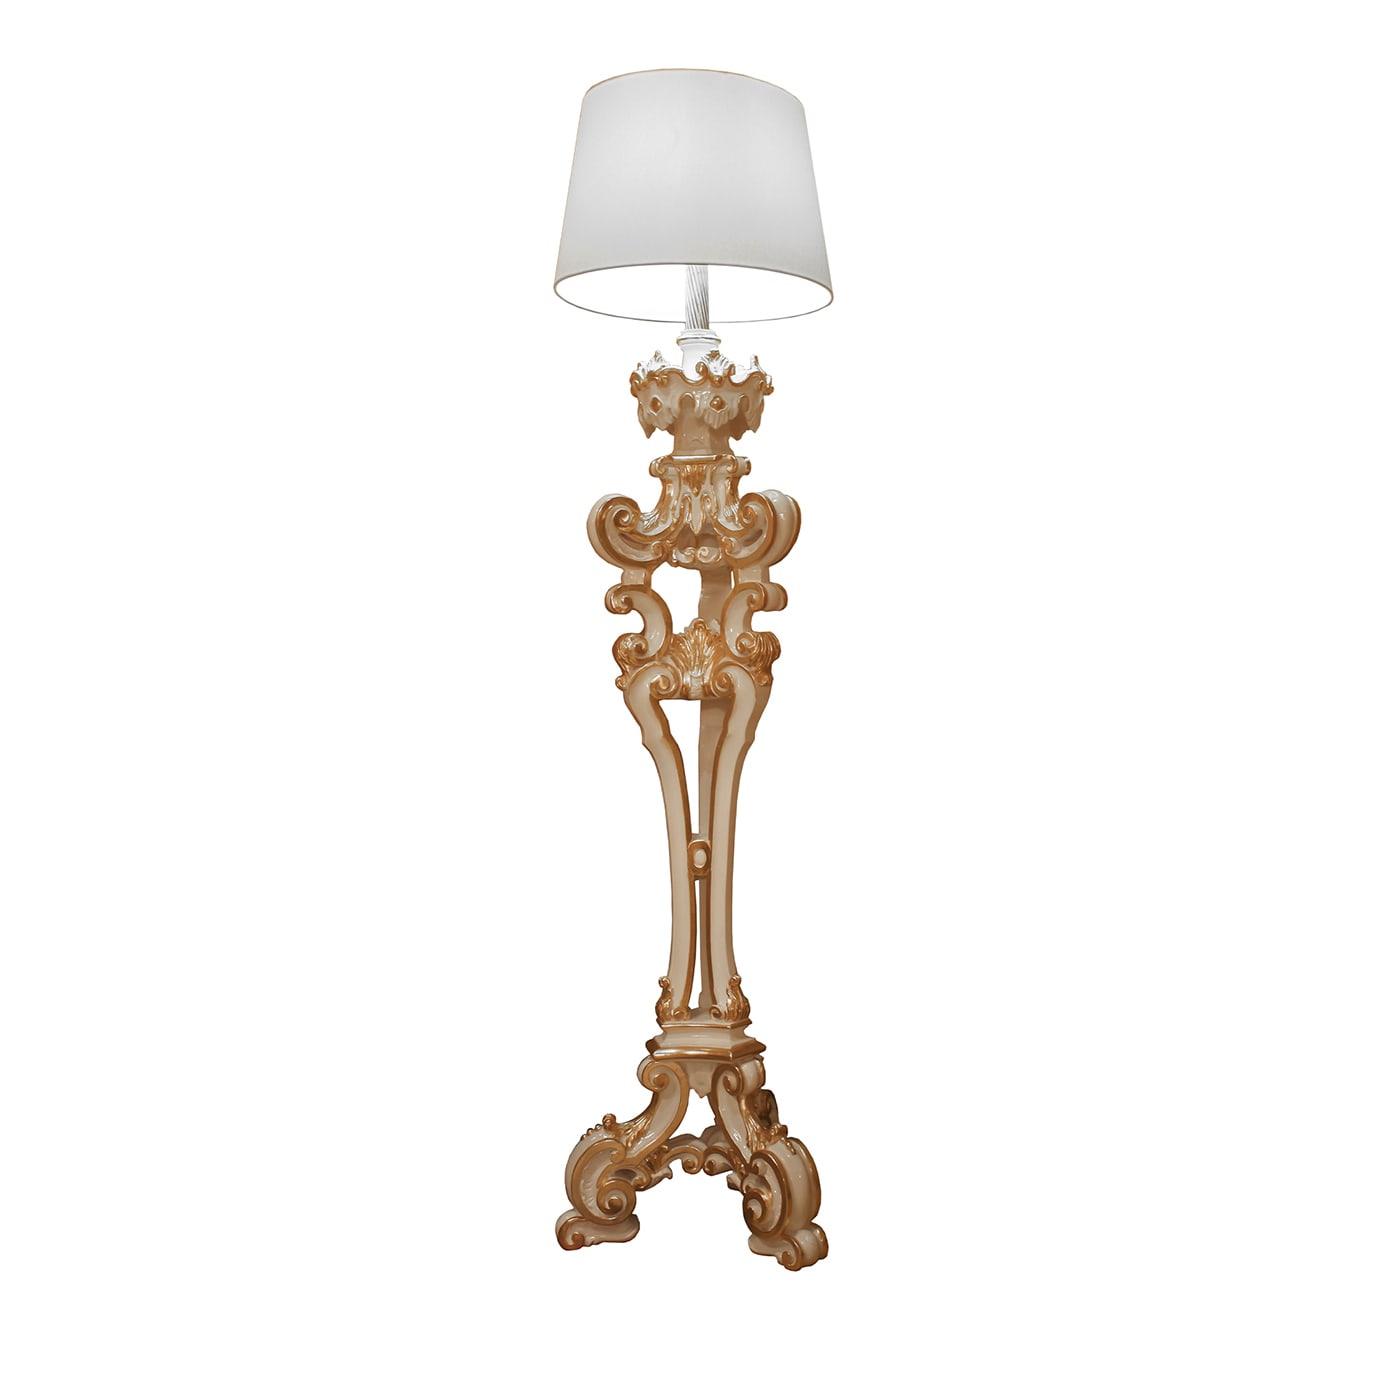 Baroque-Style White and Gold Maple Floor Lamp - CG Capelletti